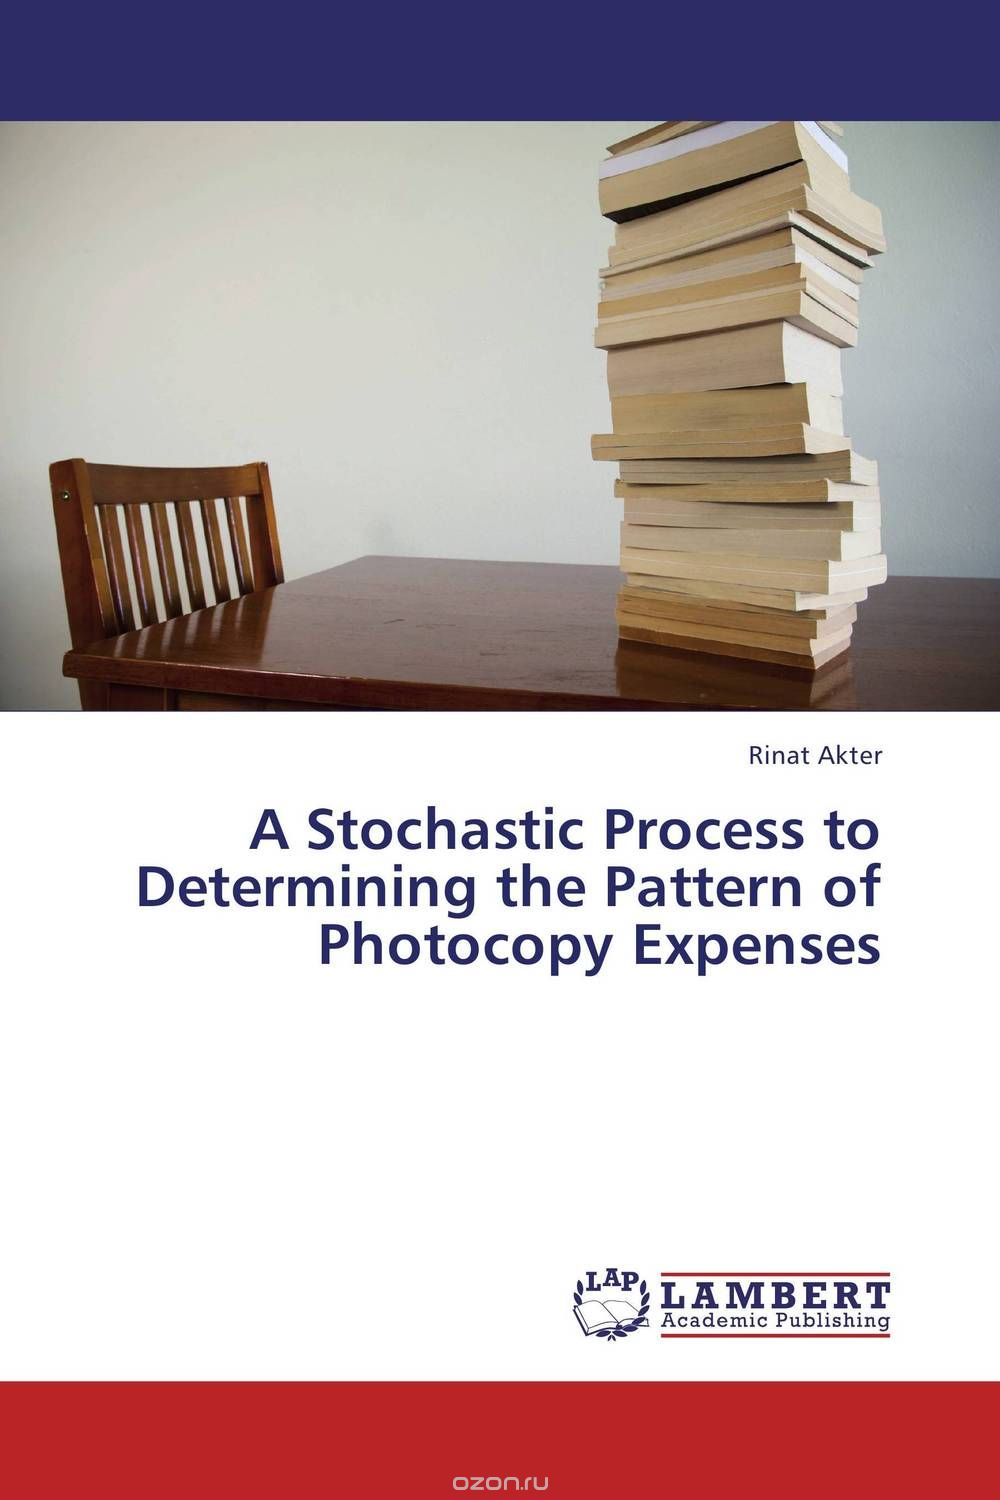 A Stochastic Process to Determining the Pattern of Photocopy Expenses